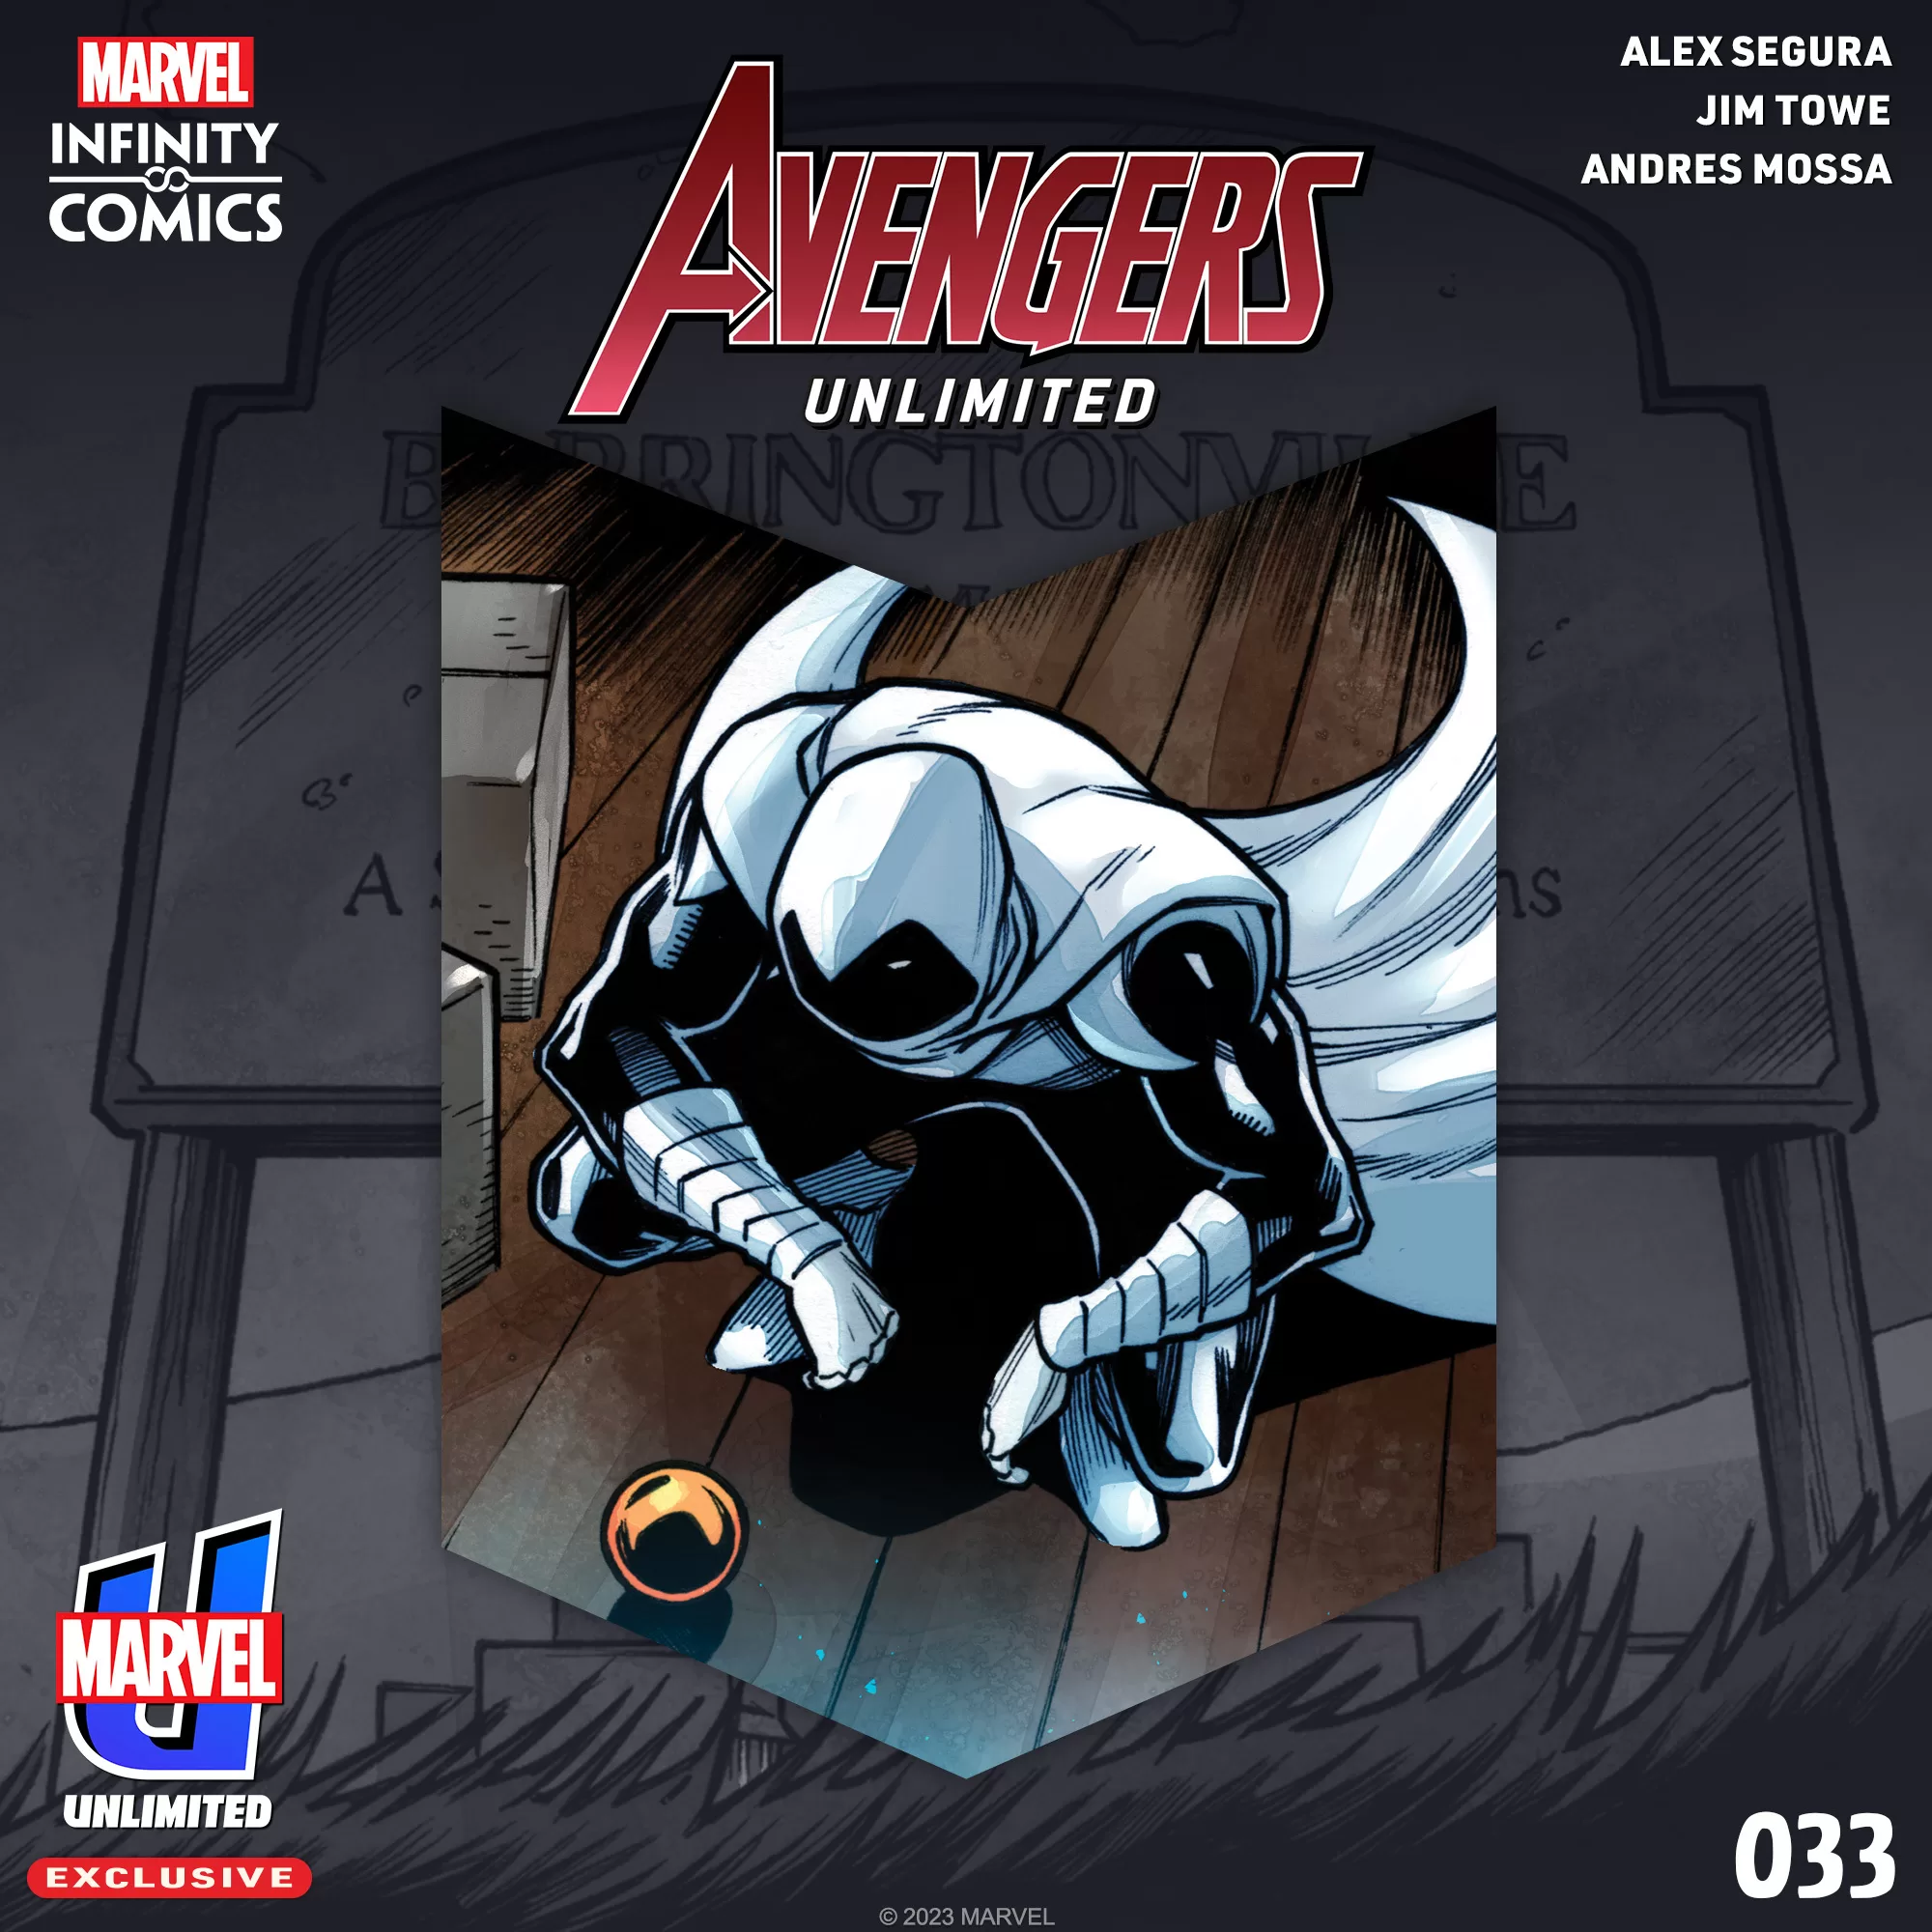 Moon Knight in Avengers Unlimited #33